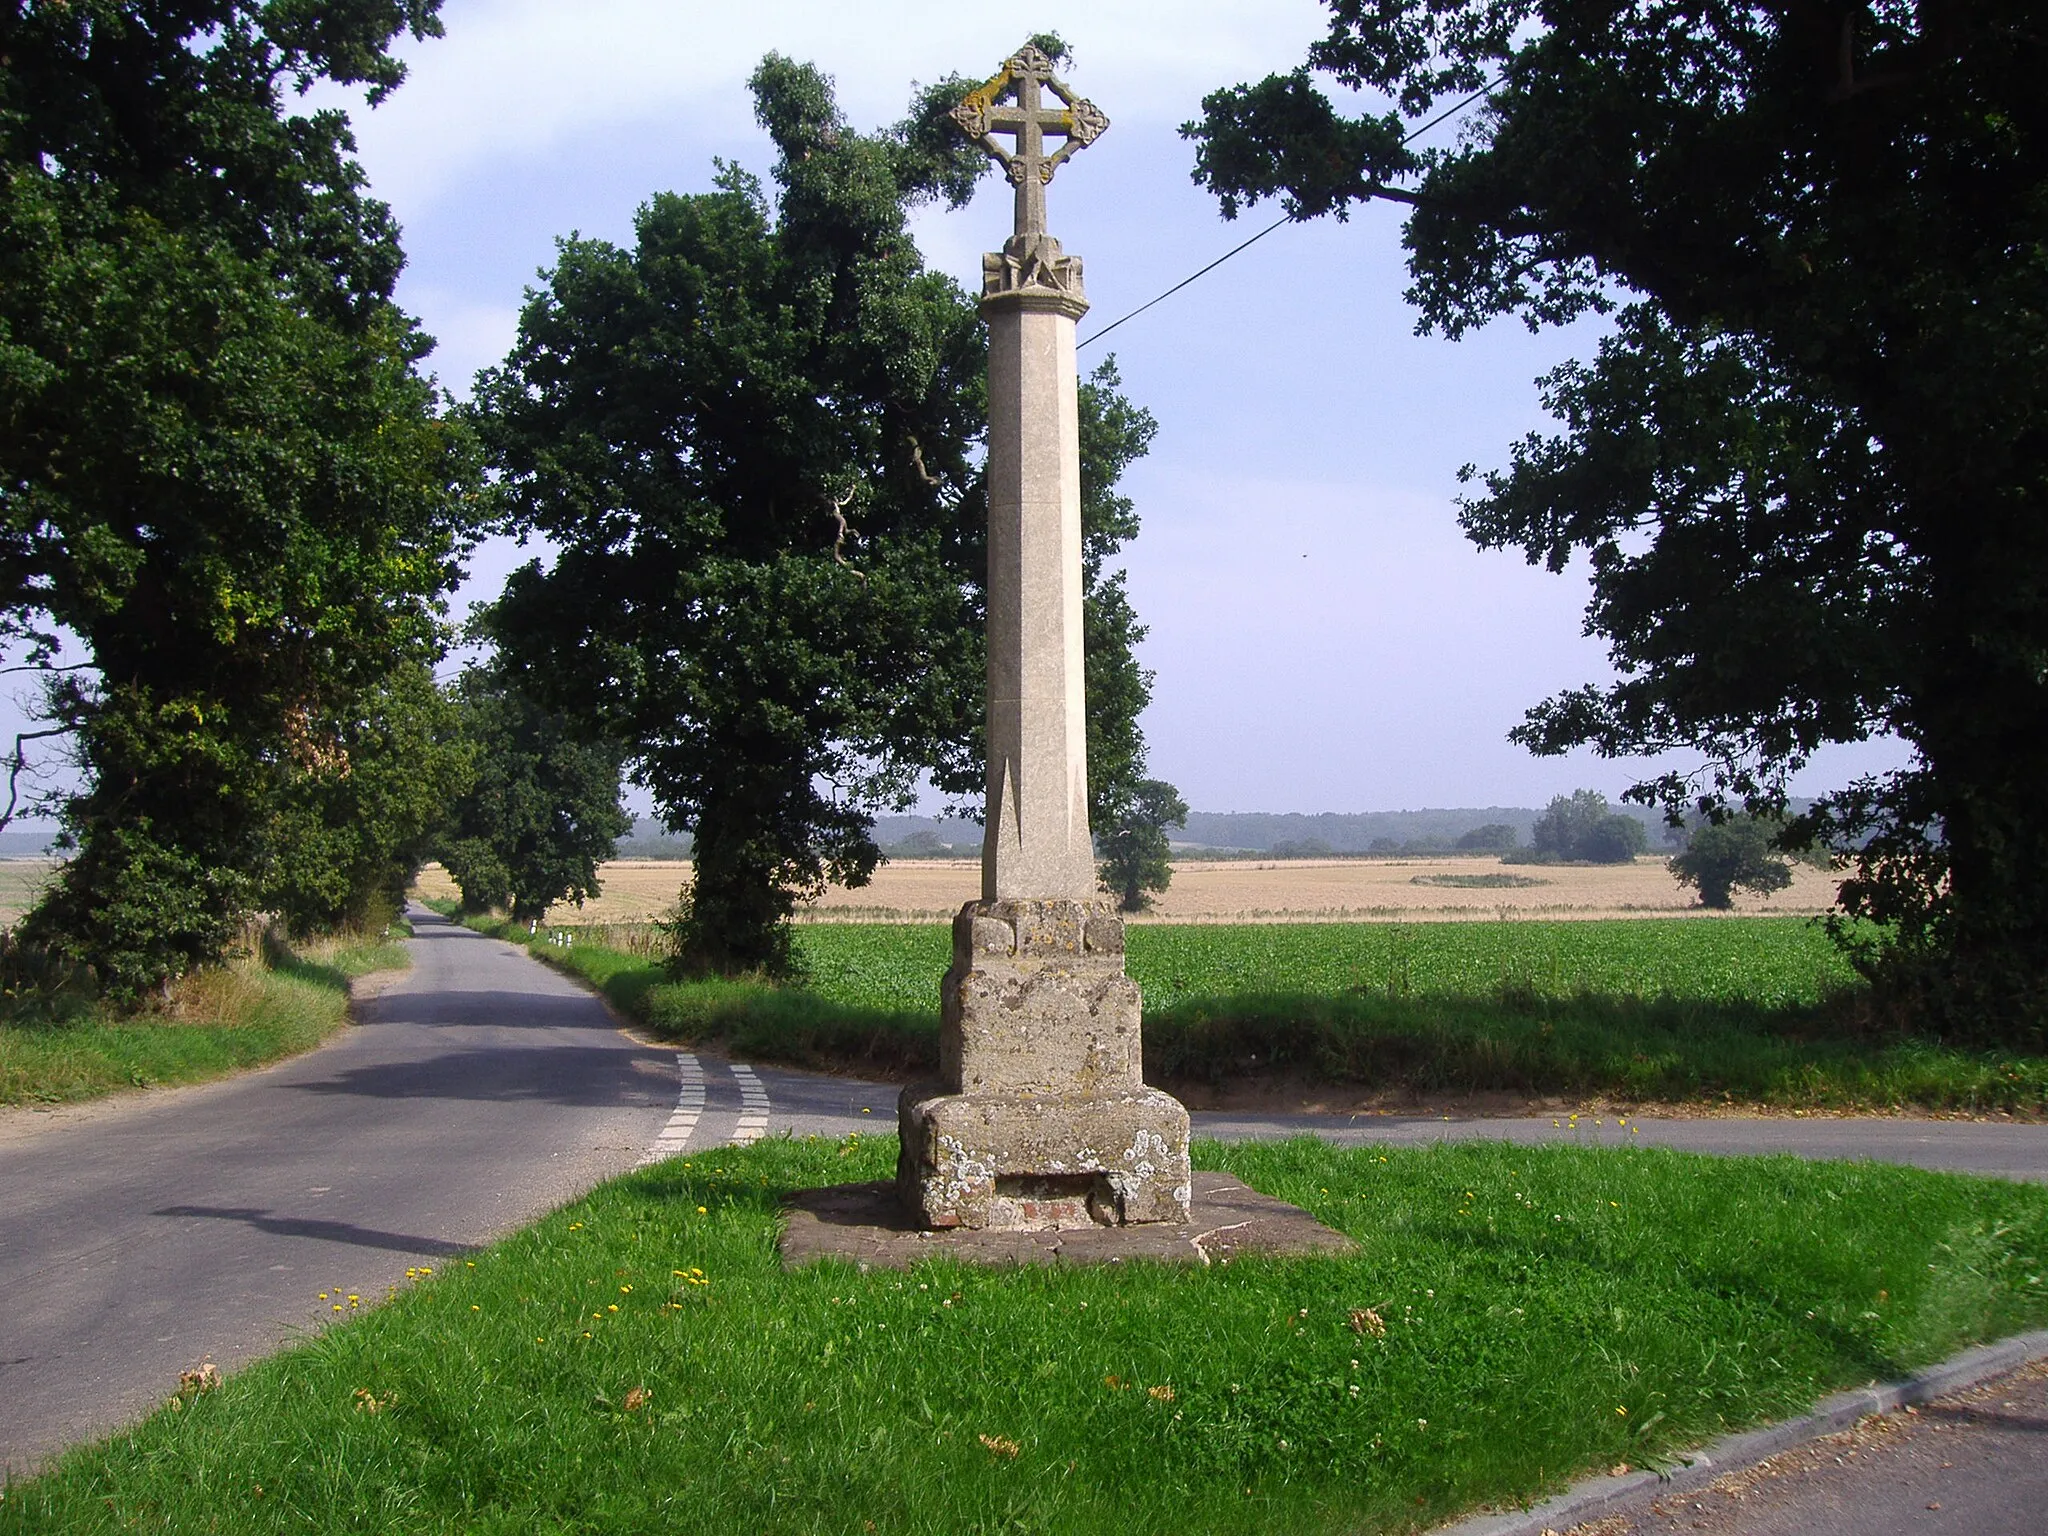 Photo showing: The Stone cross south of the village of Aylmerton in the english county of Norfolk